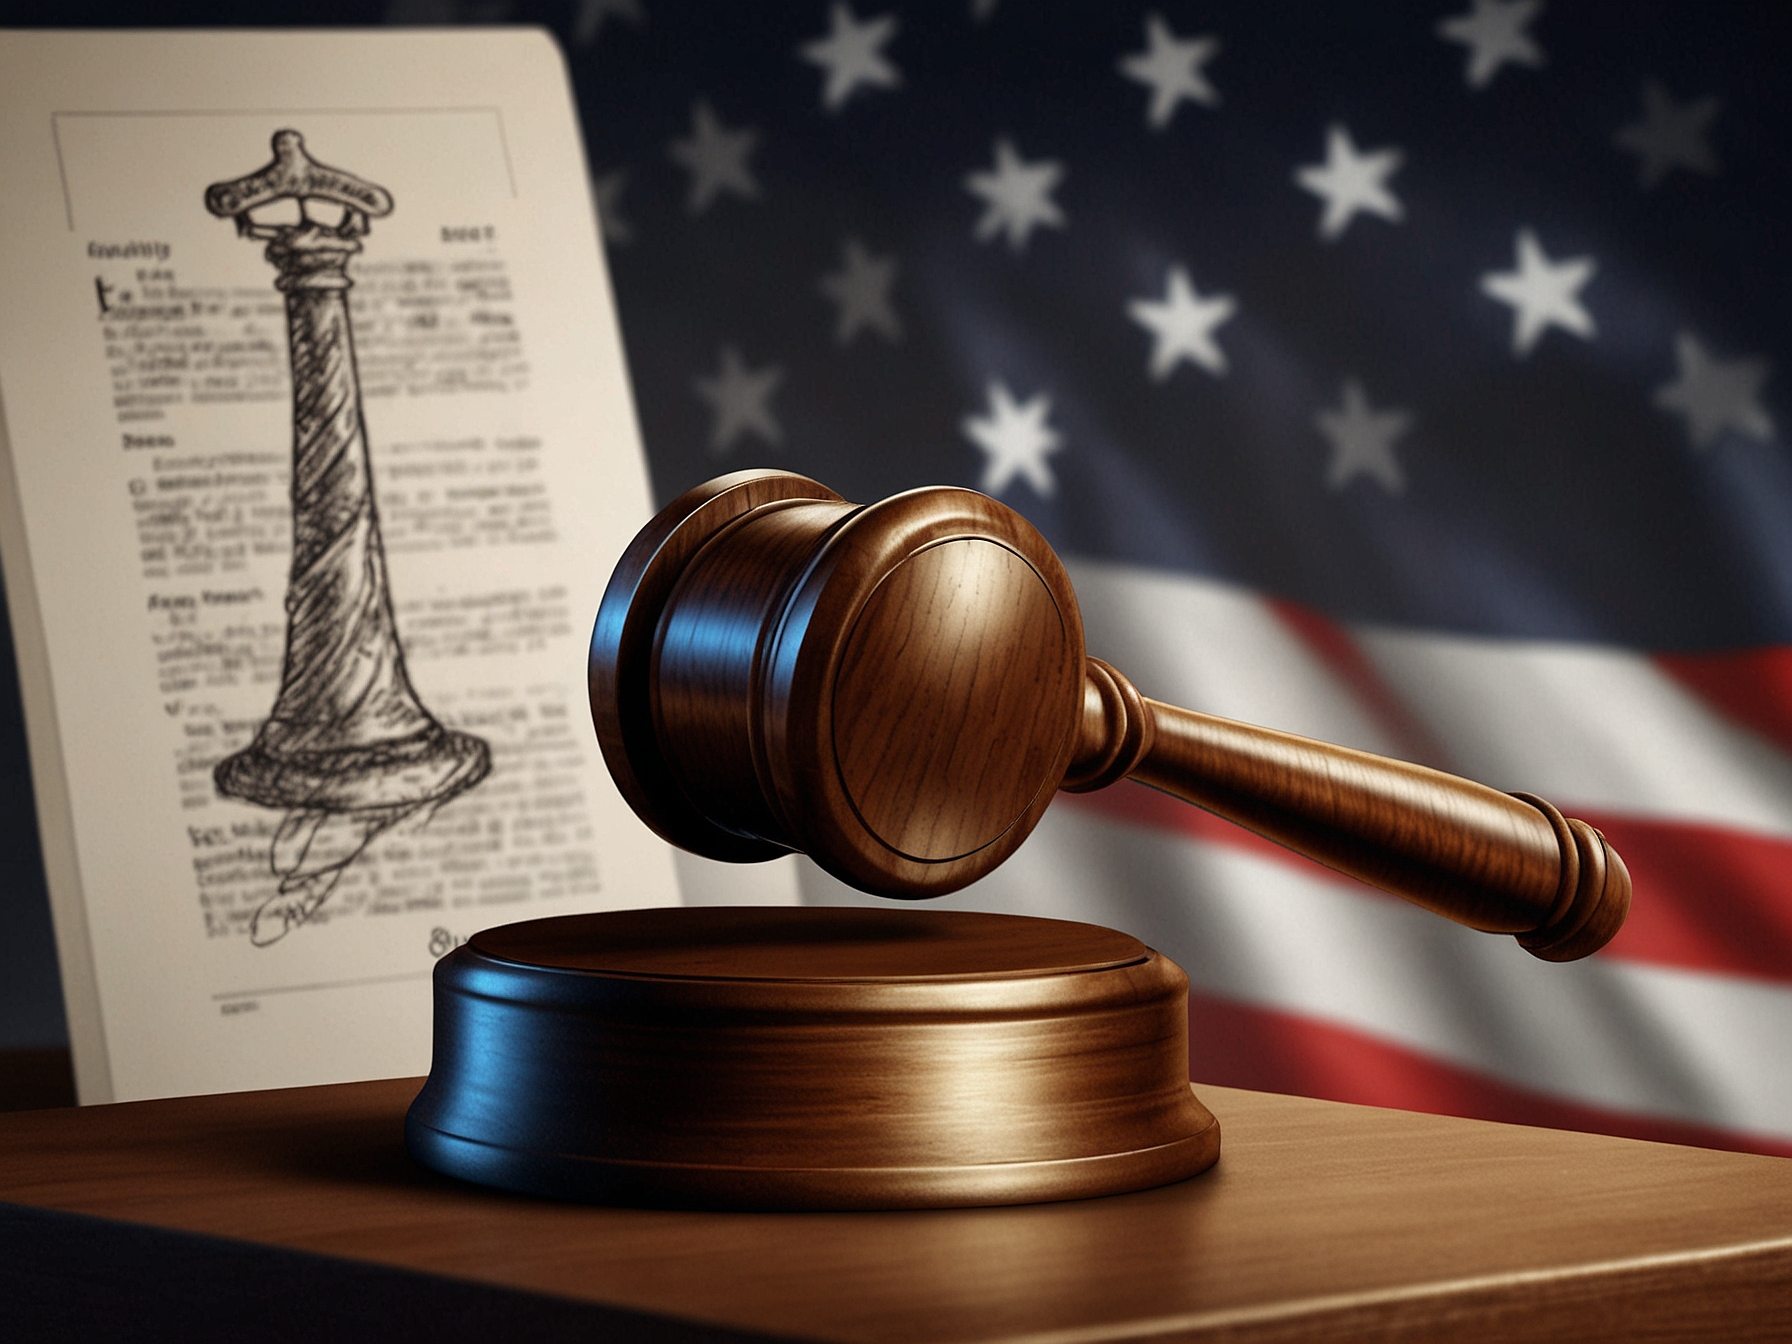 Illustration of a gavel and the TikTok app icon, symbolizing the ongoing legal battles and judicial interventions crucial for TikTok's operations in the United States.